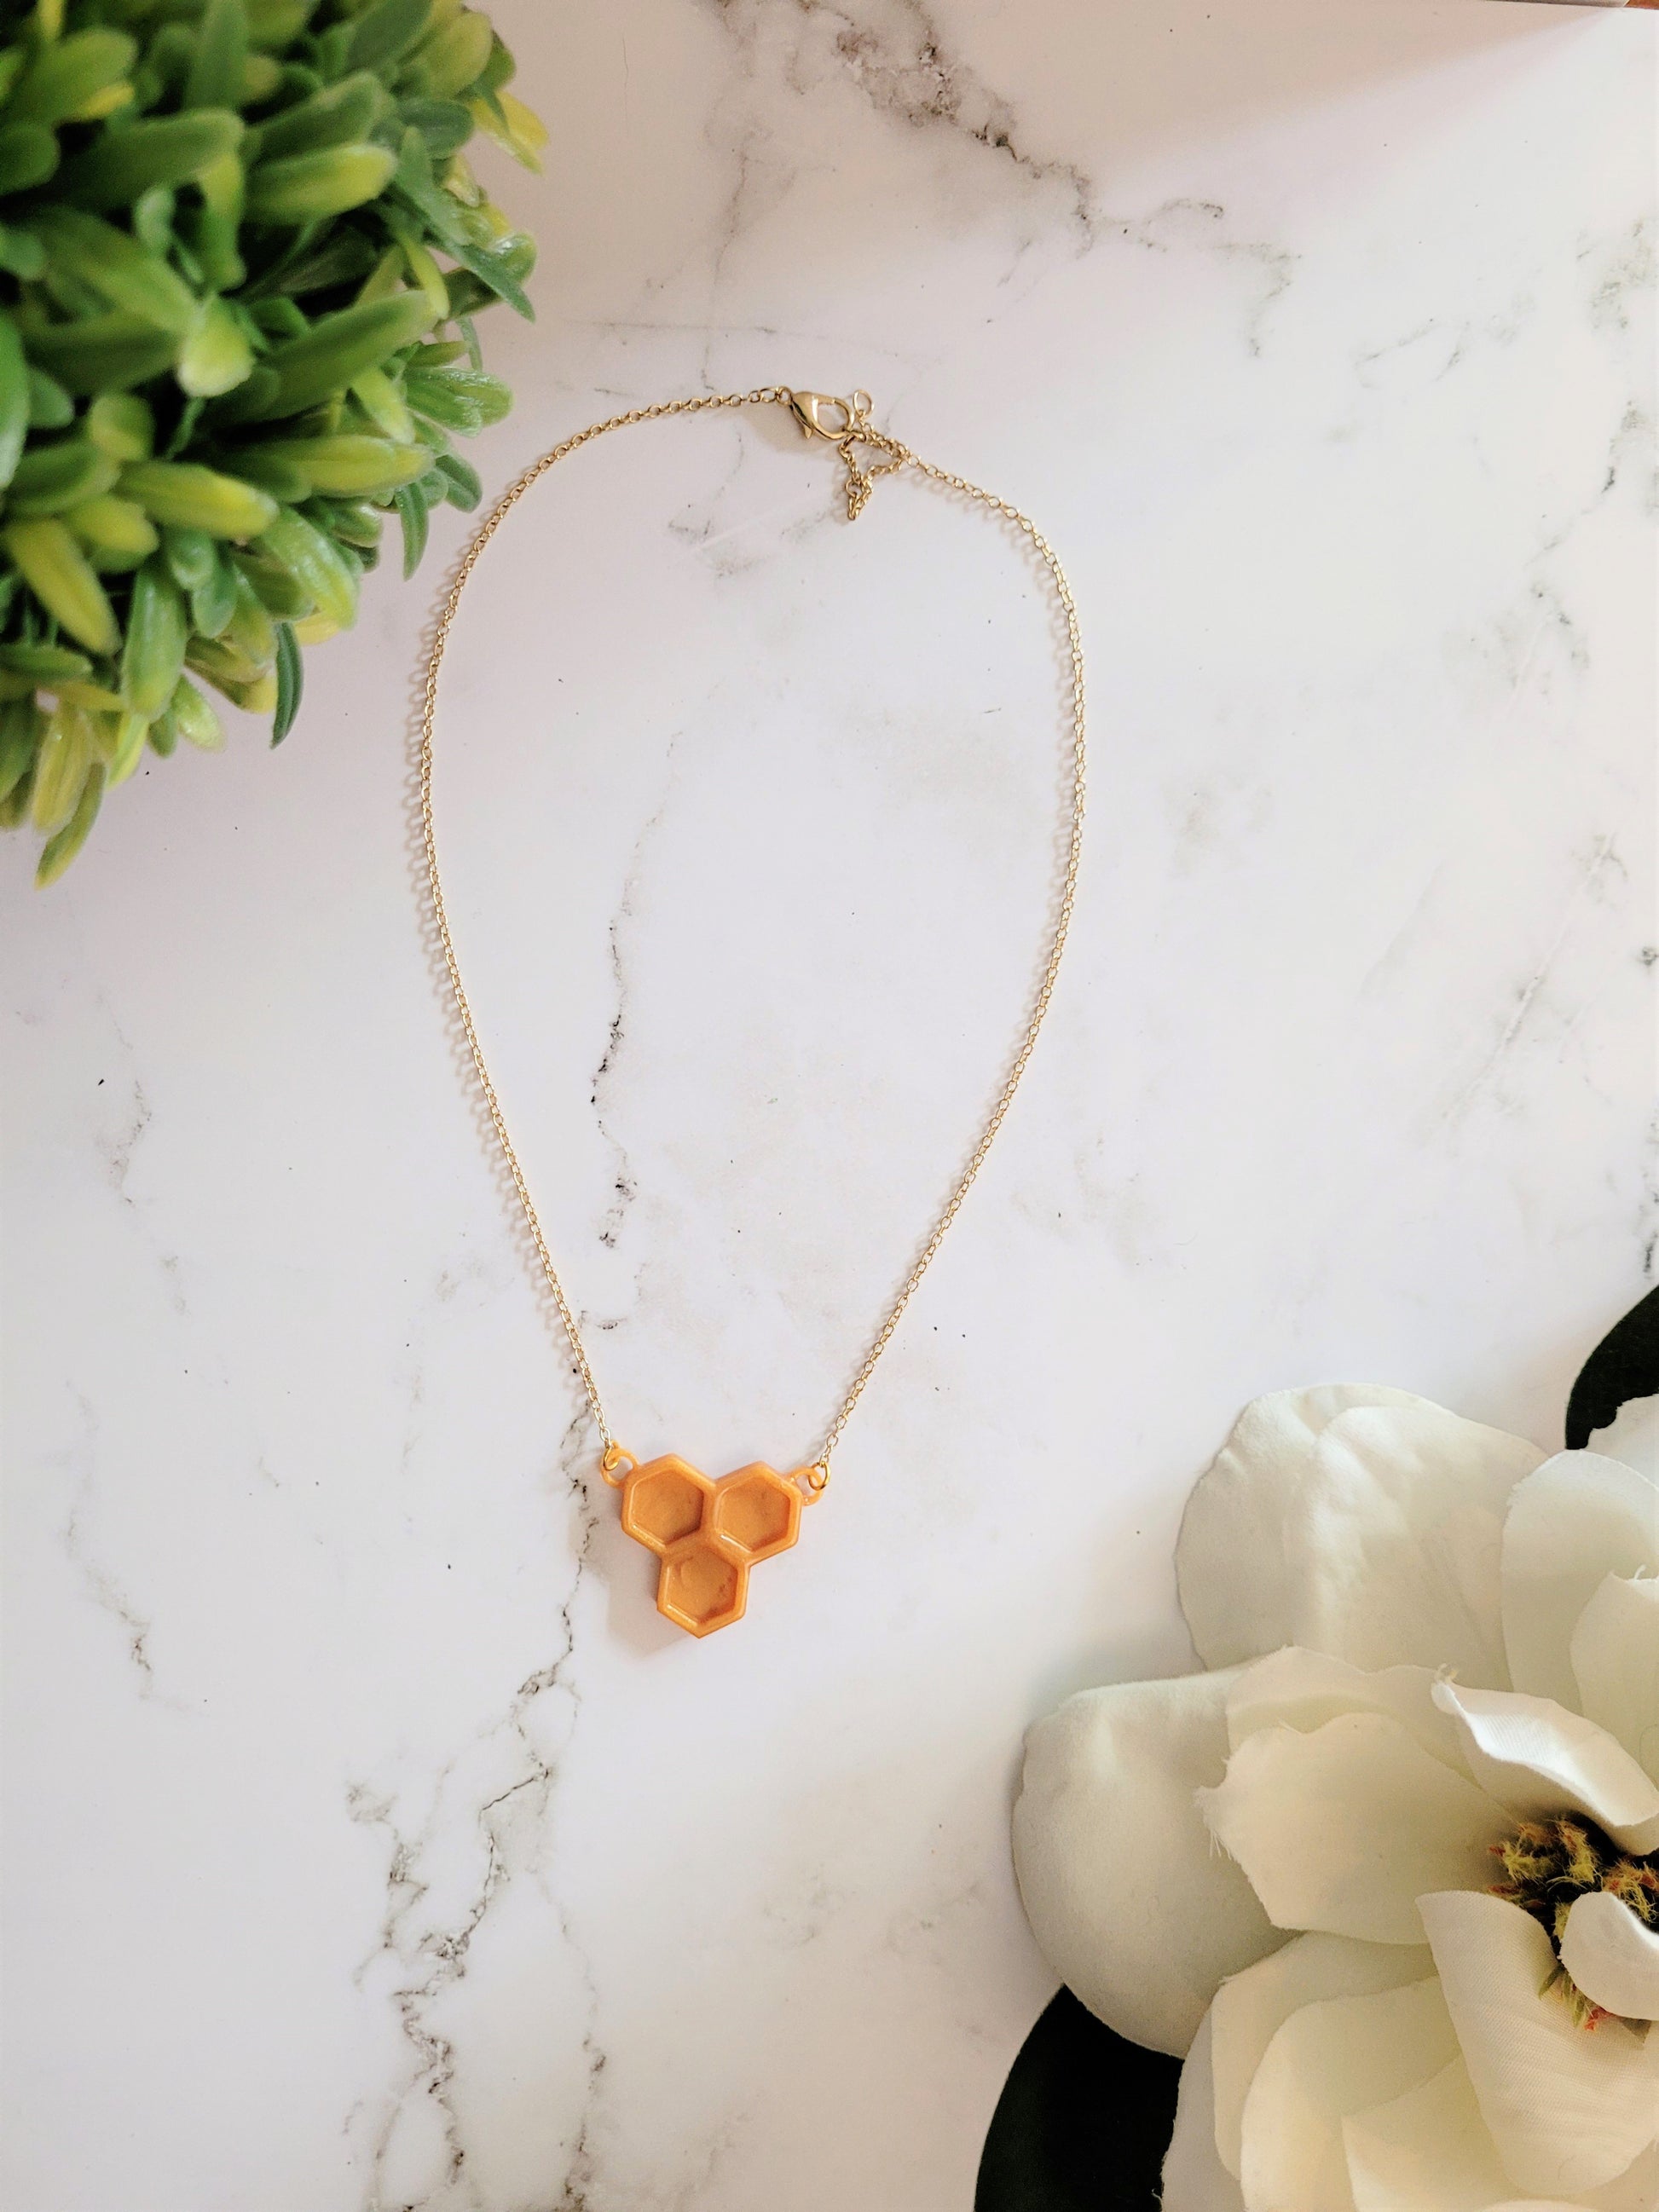 Honeycomb shaped resin necklace  on a white background.